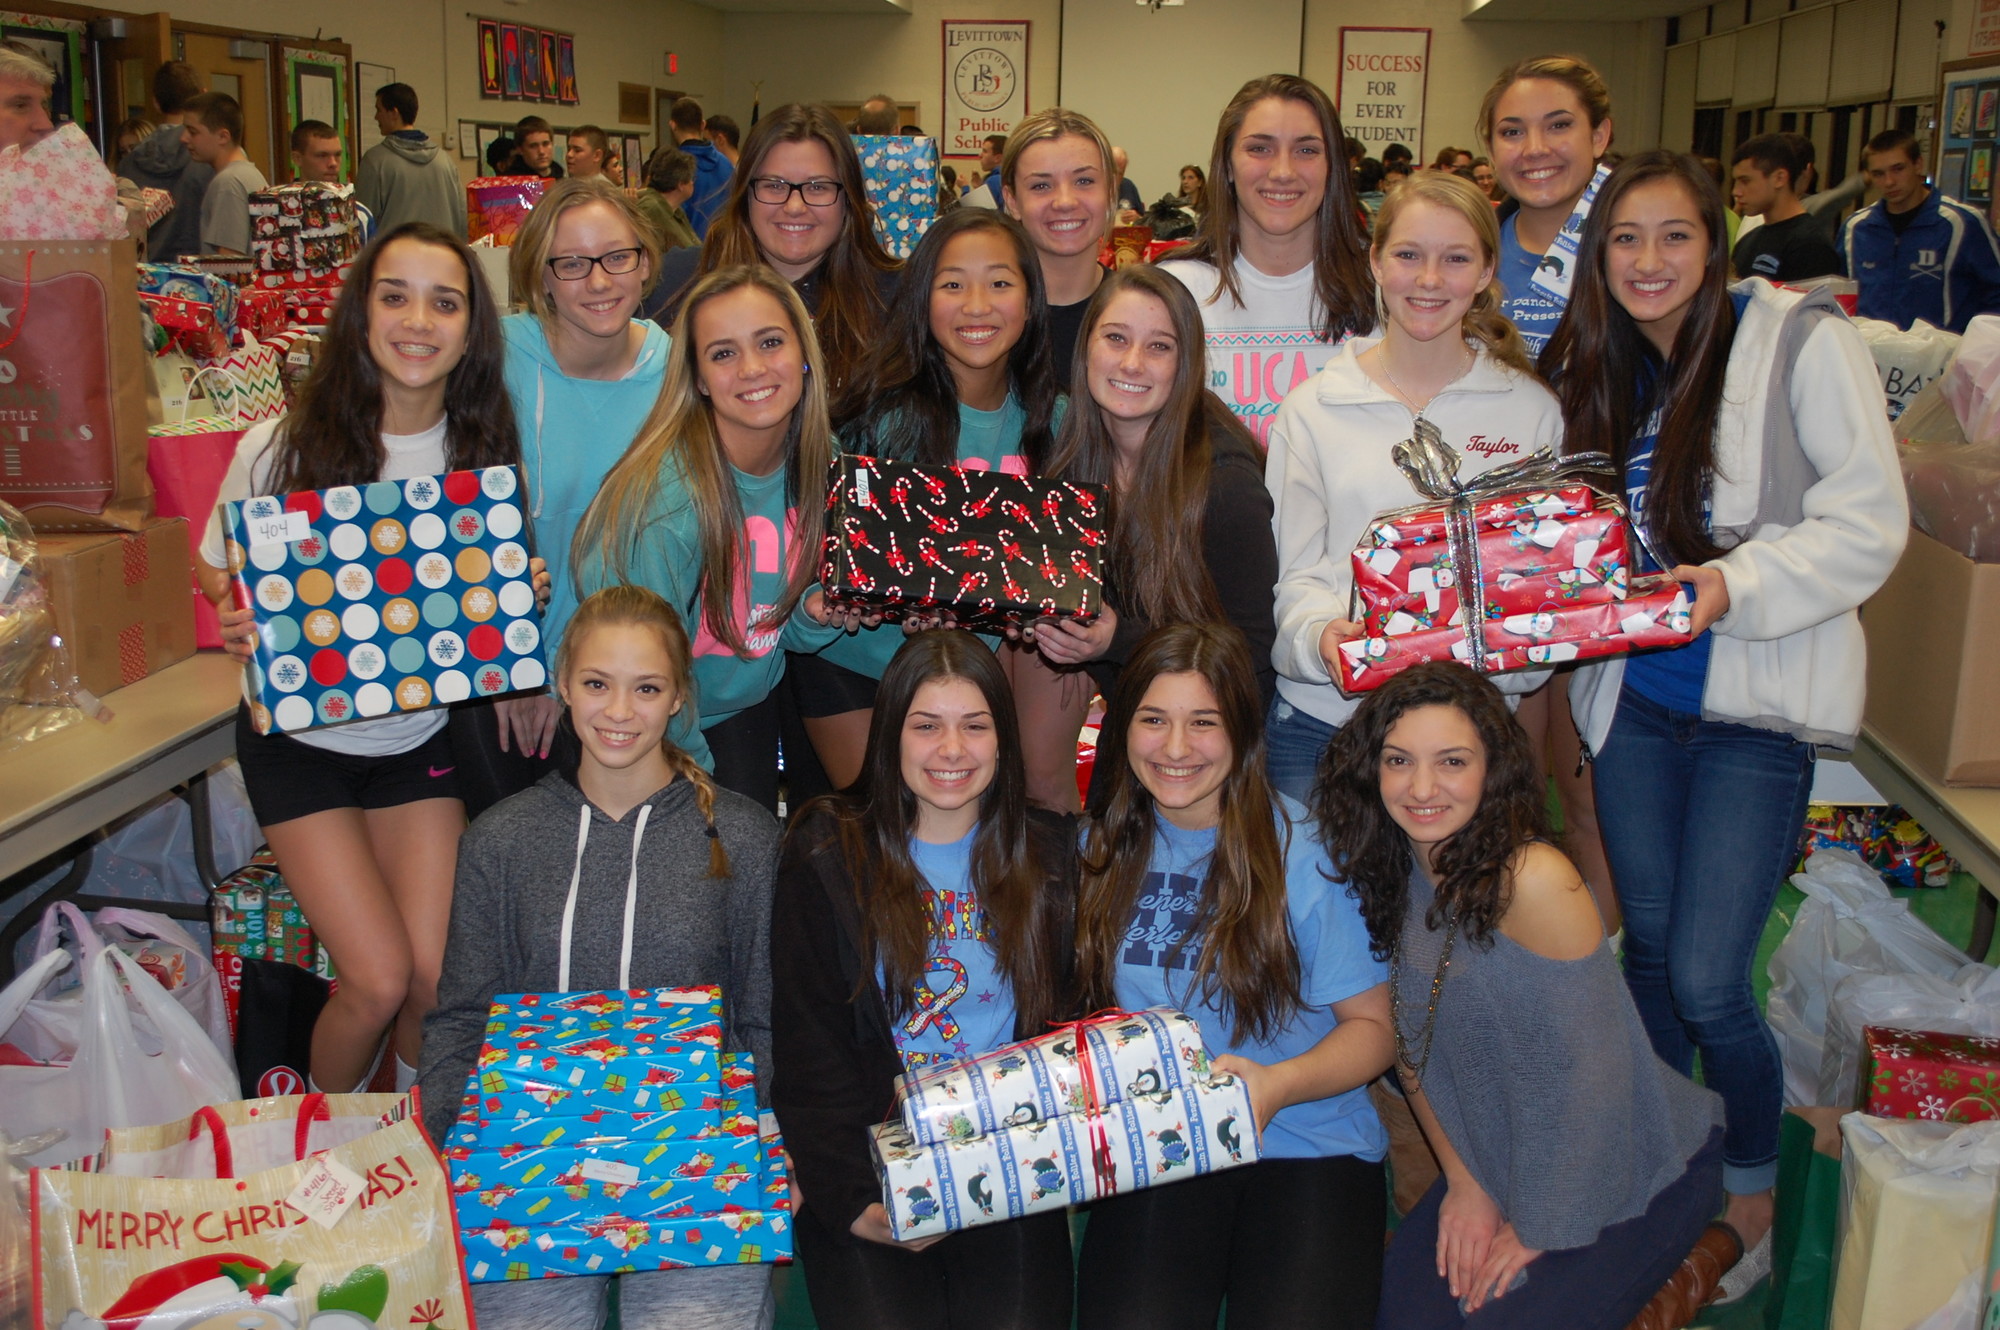 MacArthur High School Cheerleaders were among the volunteers who helped sort and wrap gifts for Levittown’s Adopt-A-Family program.